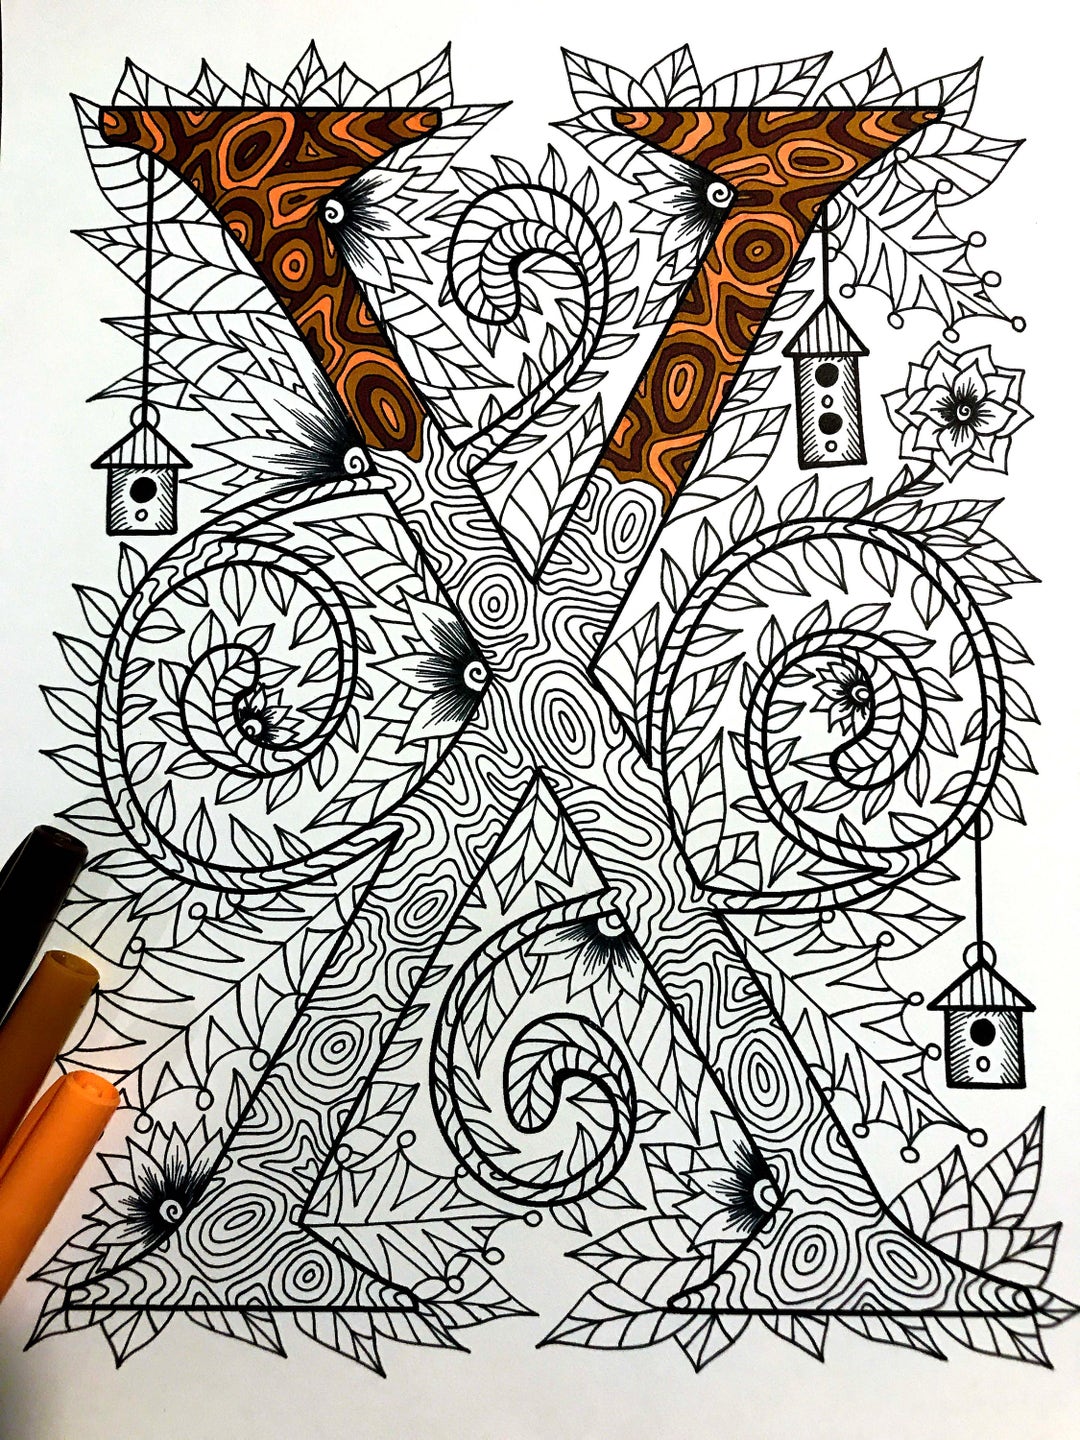 Letter X Coloring Page Inspired by the Font - Etsy